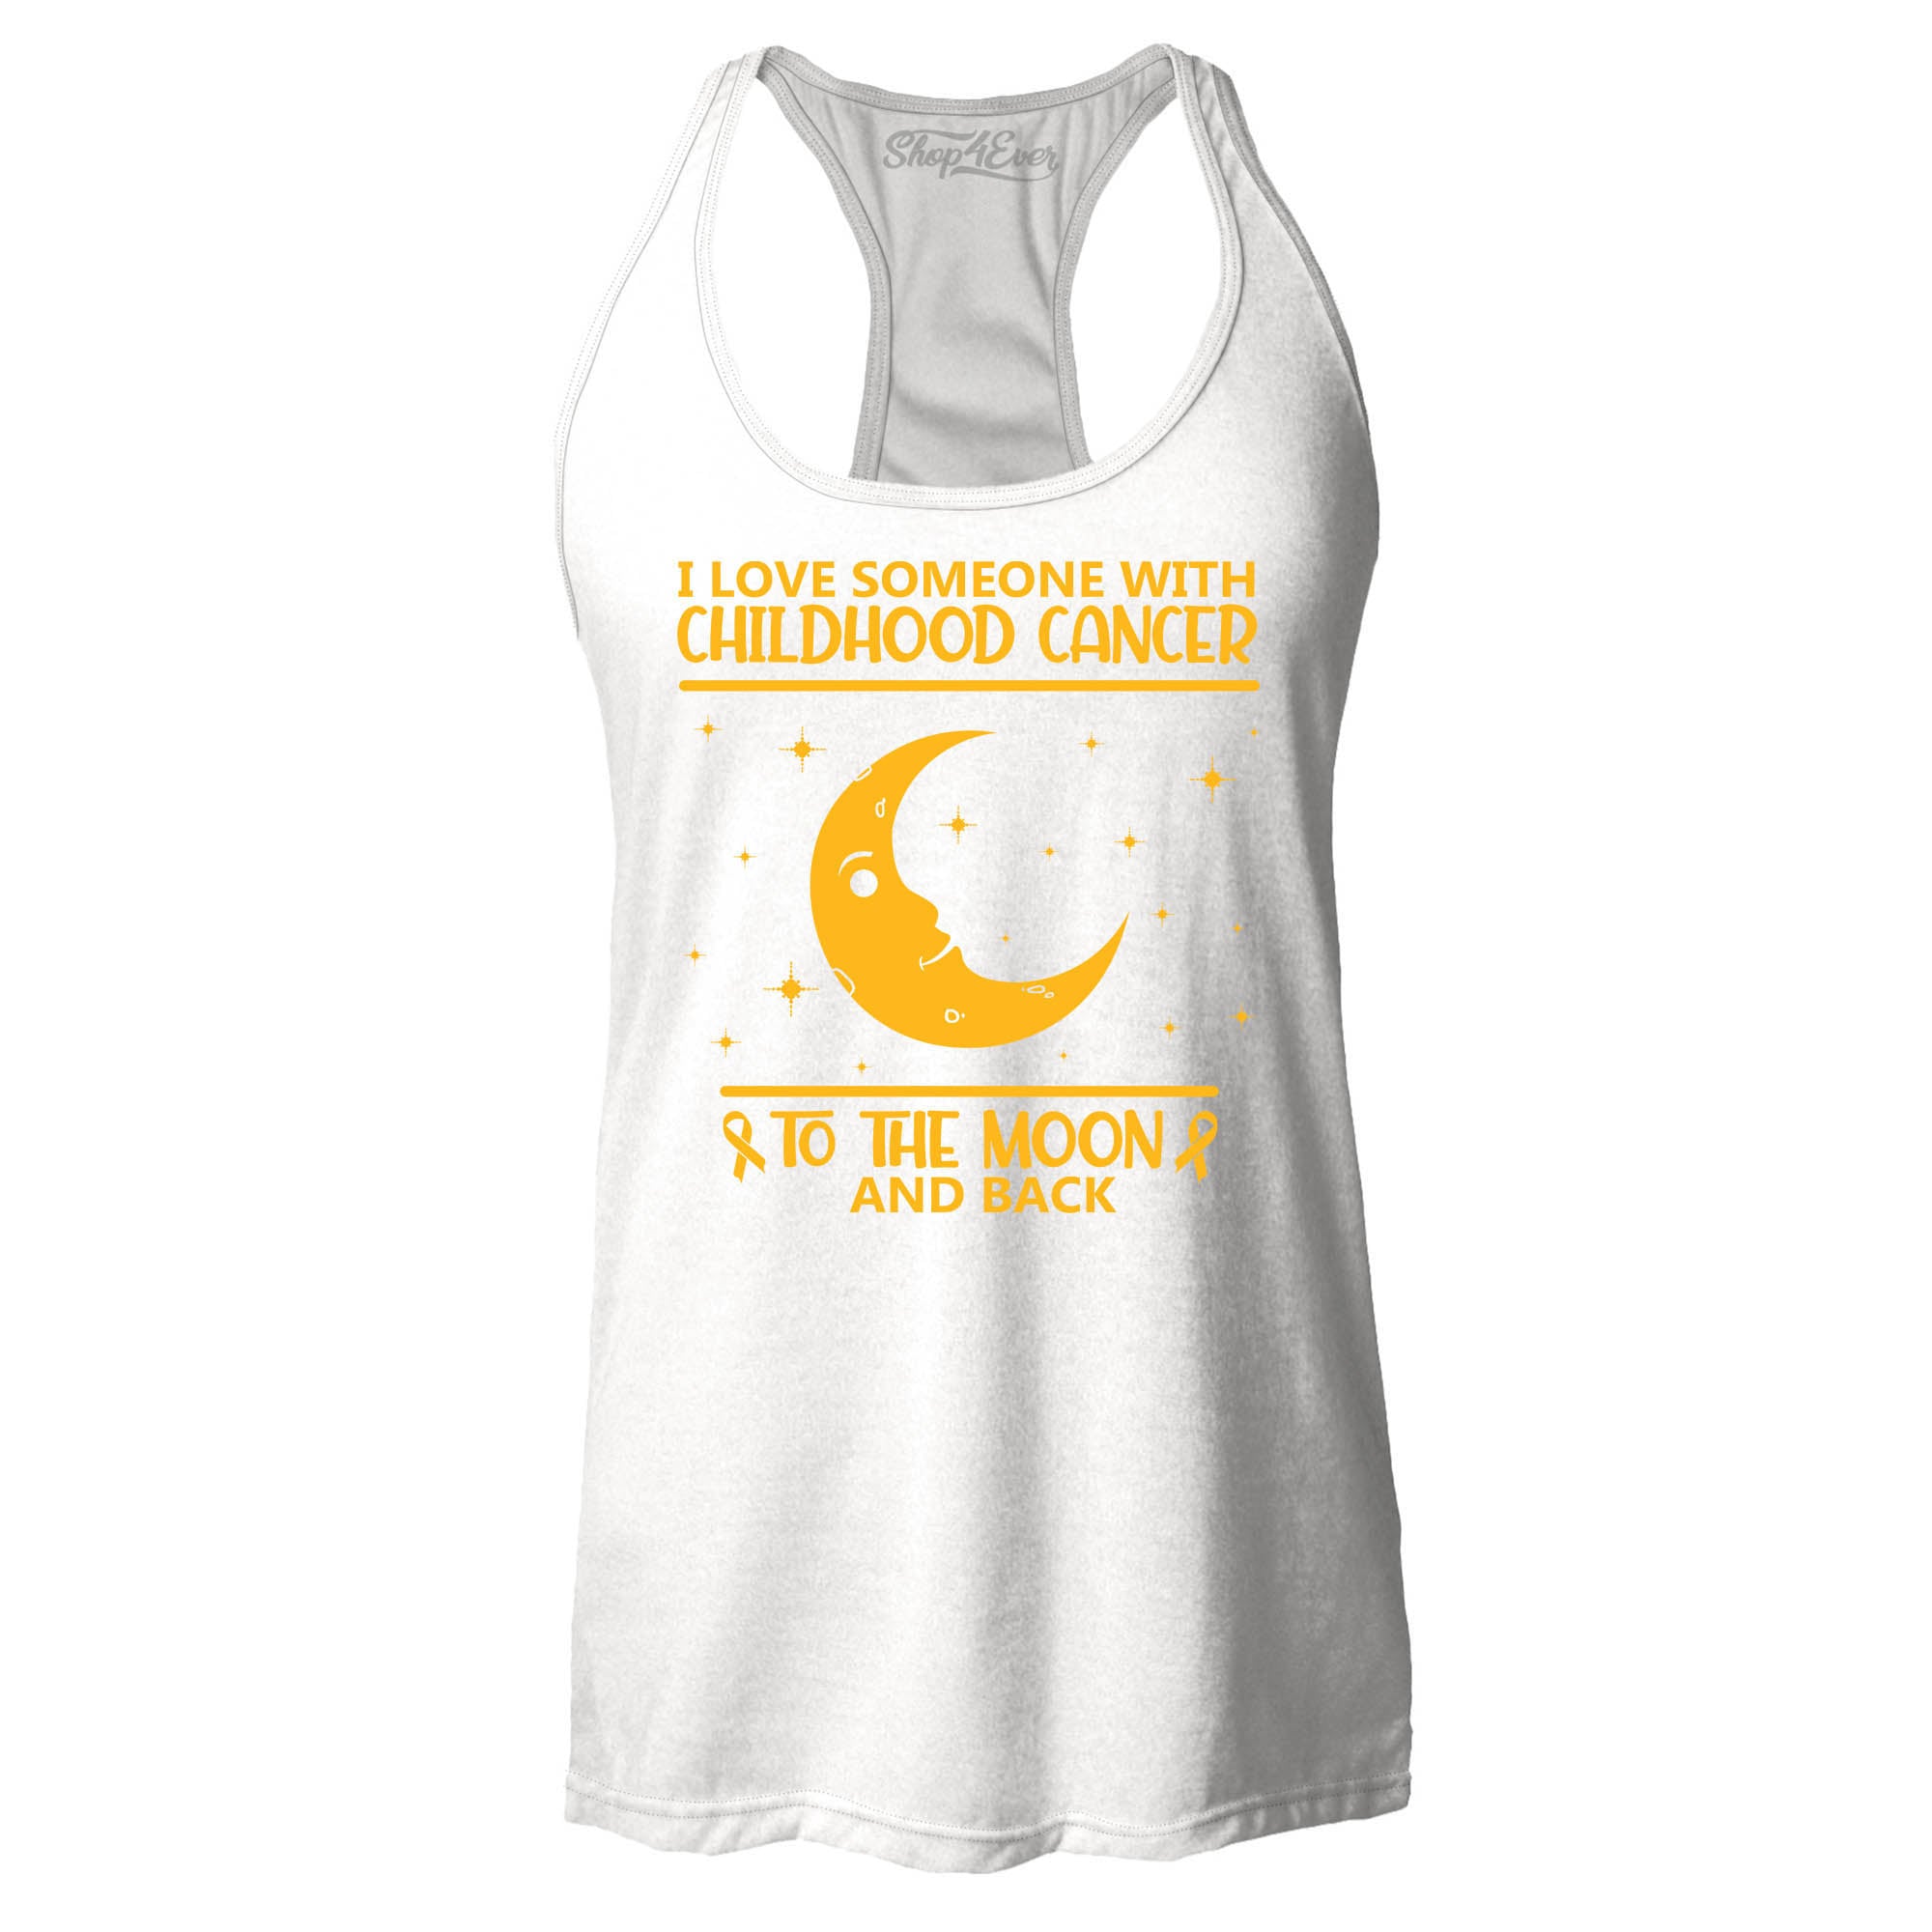 I Love Someone with Childhood Cancer to The Moon and Back Women's Racerback Tank Top Slim Fit